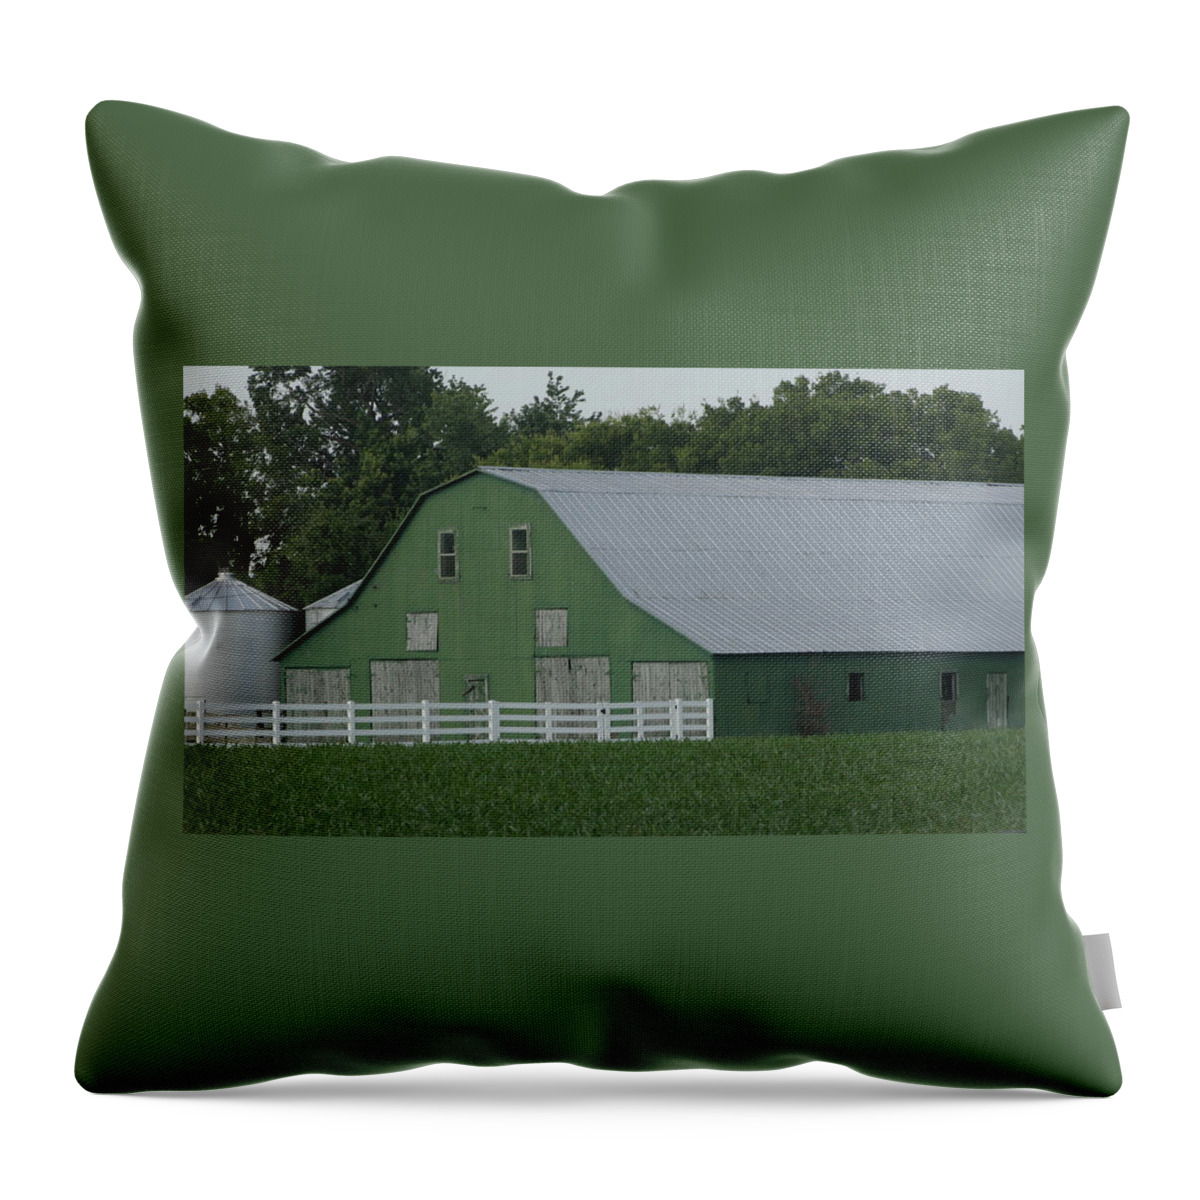 Barn Throw Pillow featuring the photograph Kentucky Green Barn by Valerie Collins